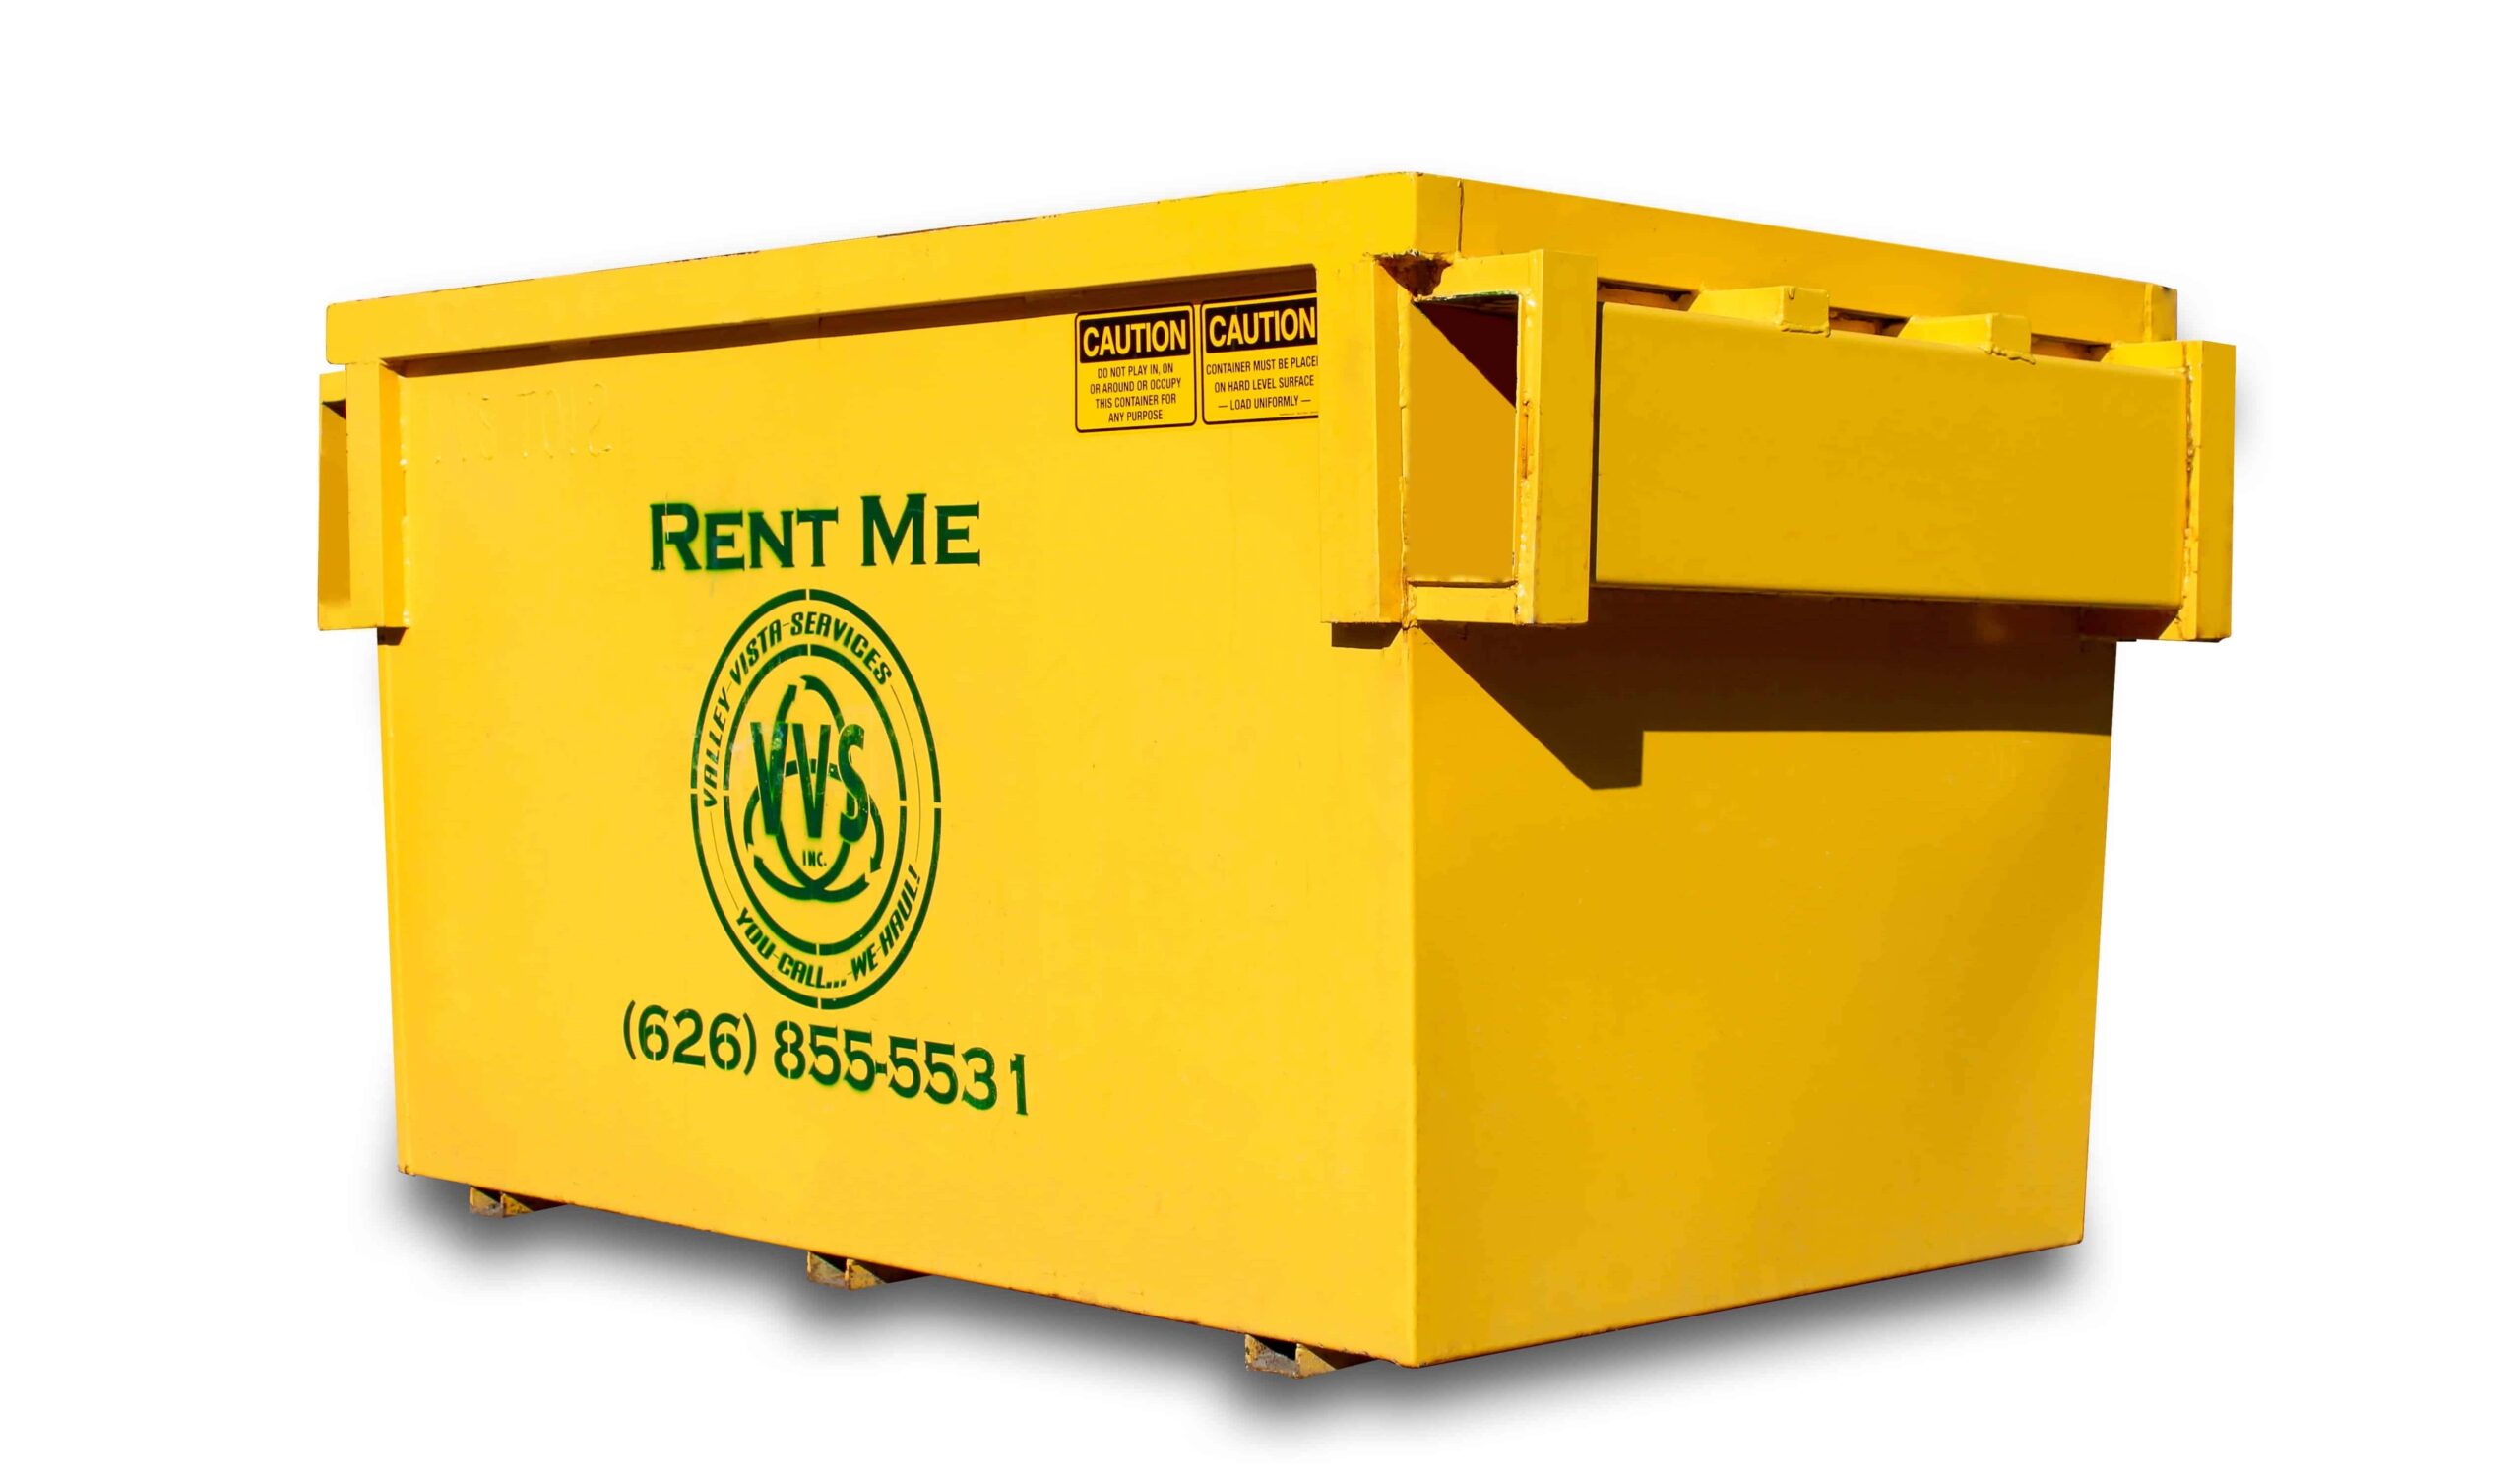 Dumpster Rentals in Pittsburgh PA